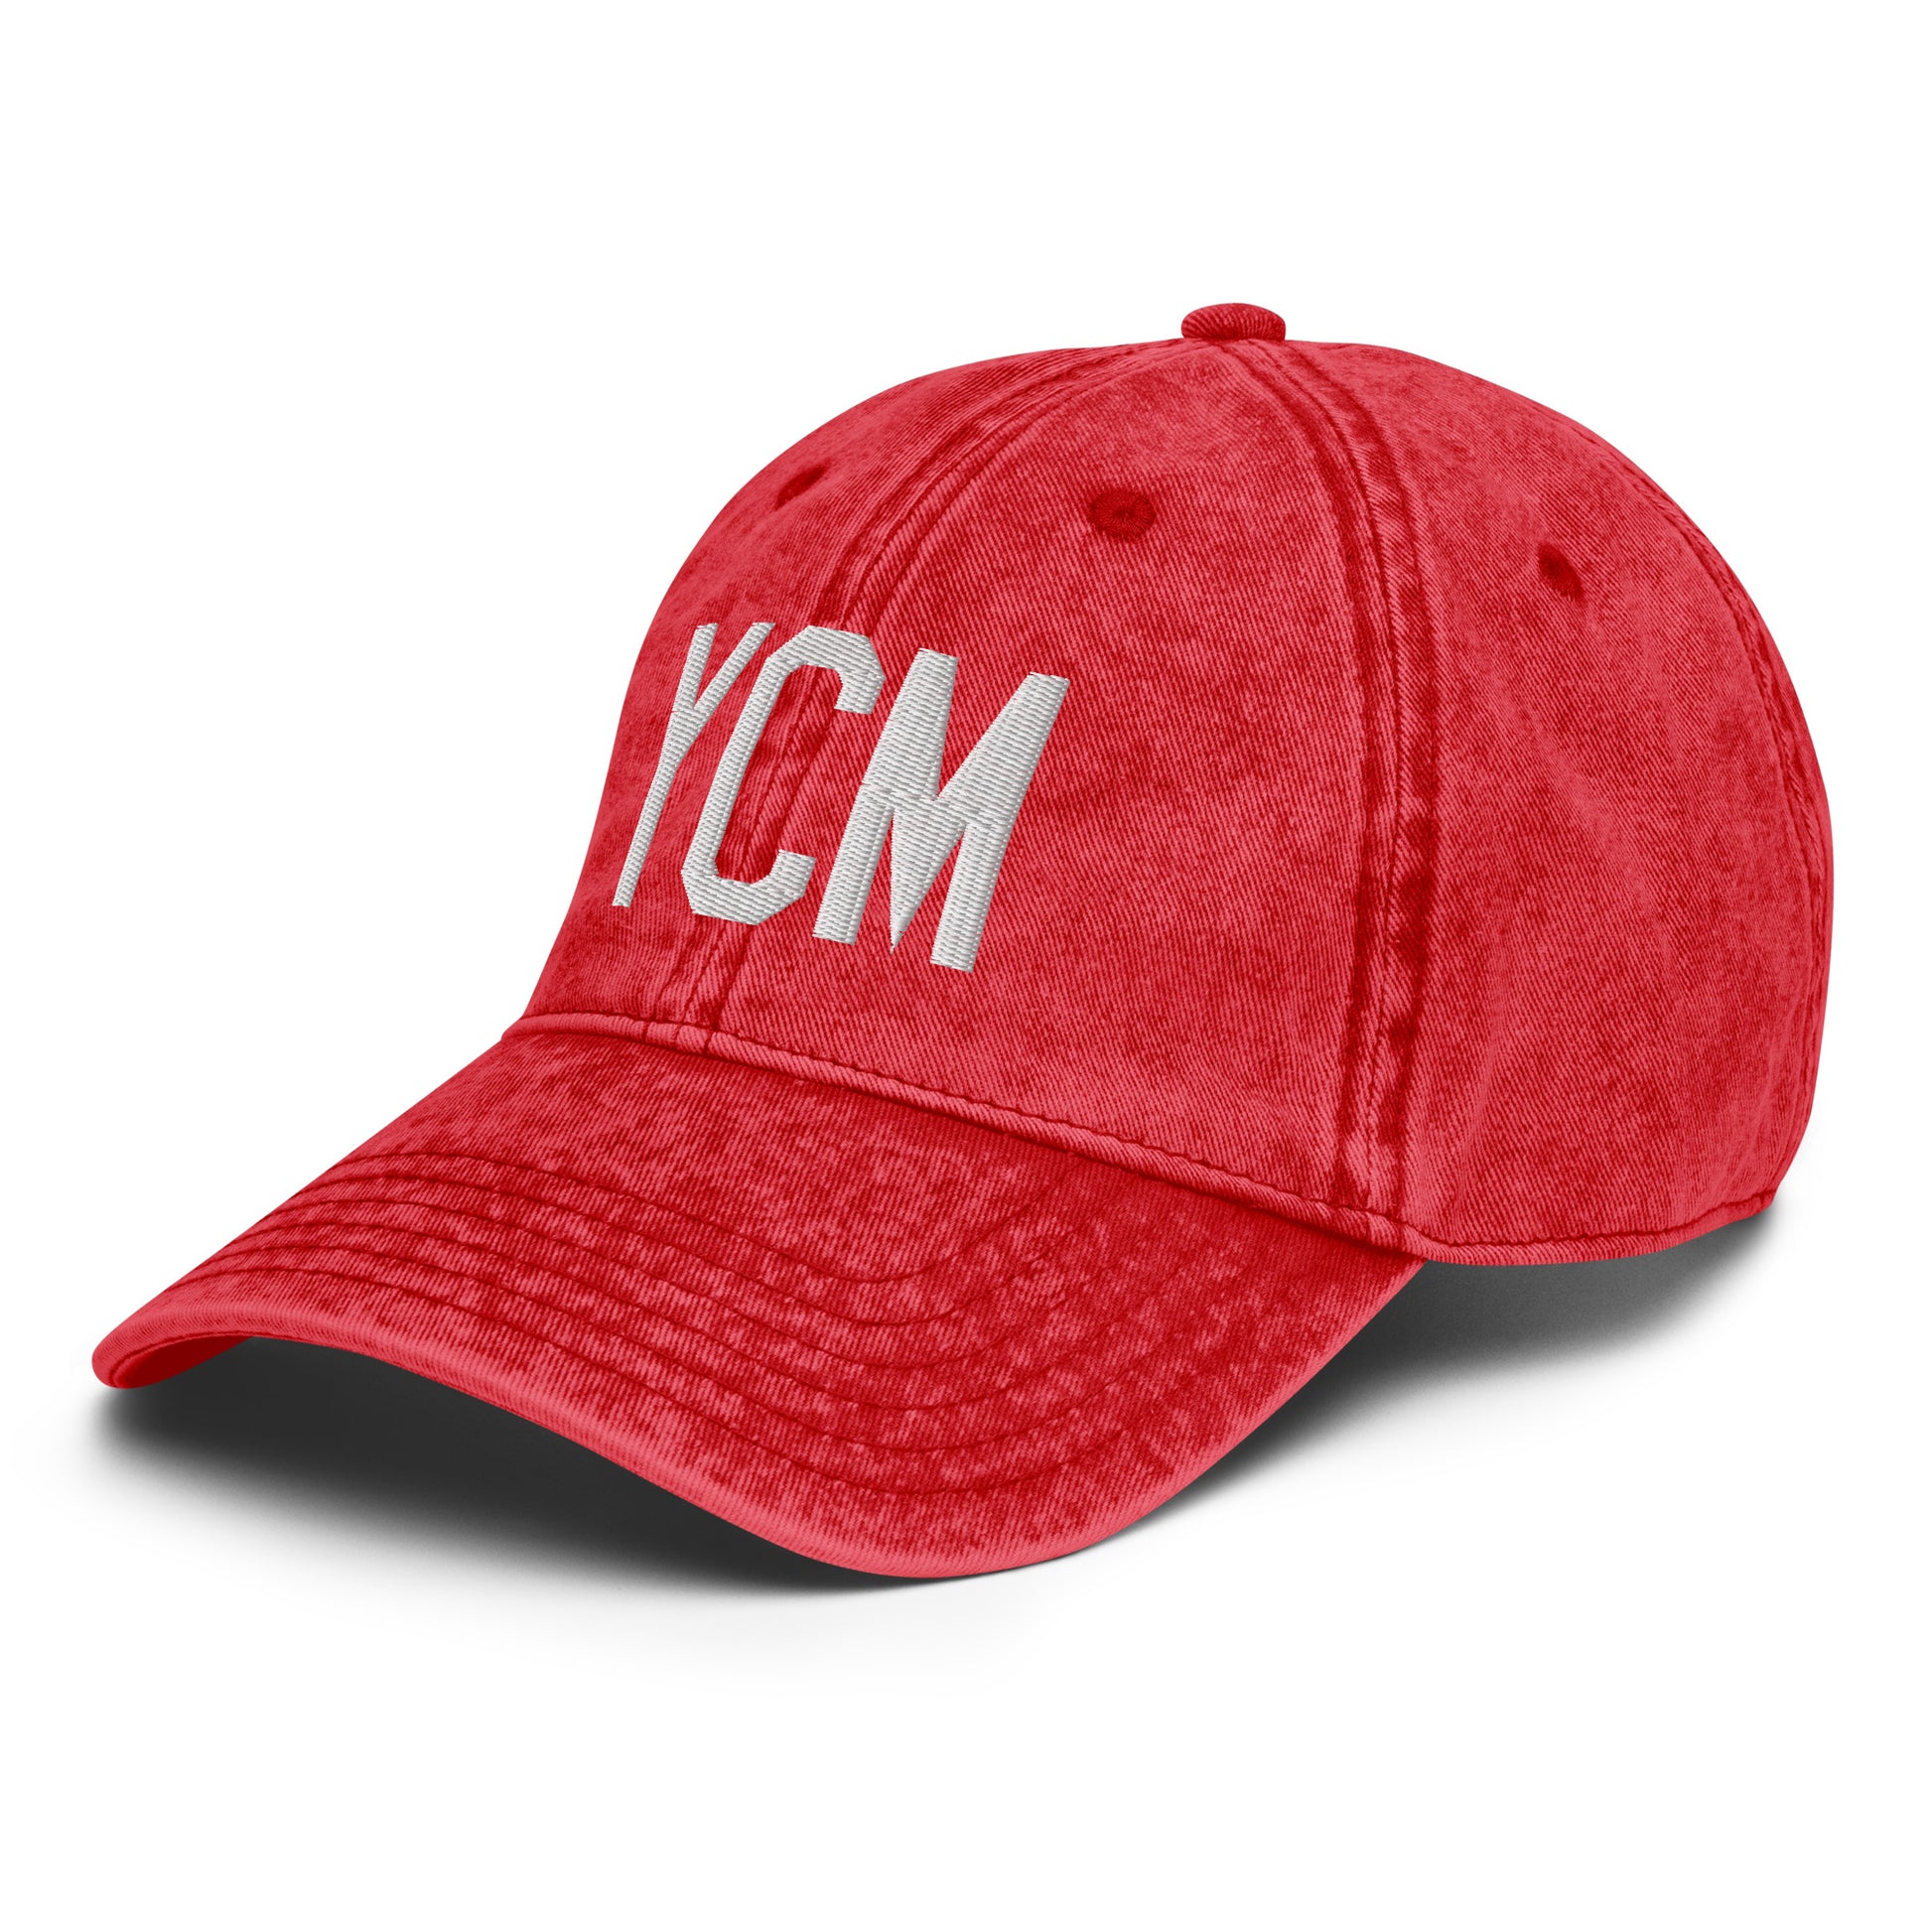 Airport Code Twill Cap - White • YCM St. Catharines • YHM Designs - Image 23